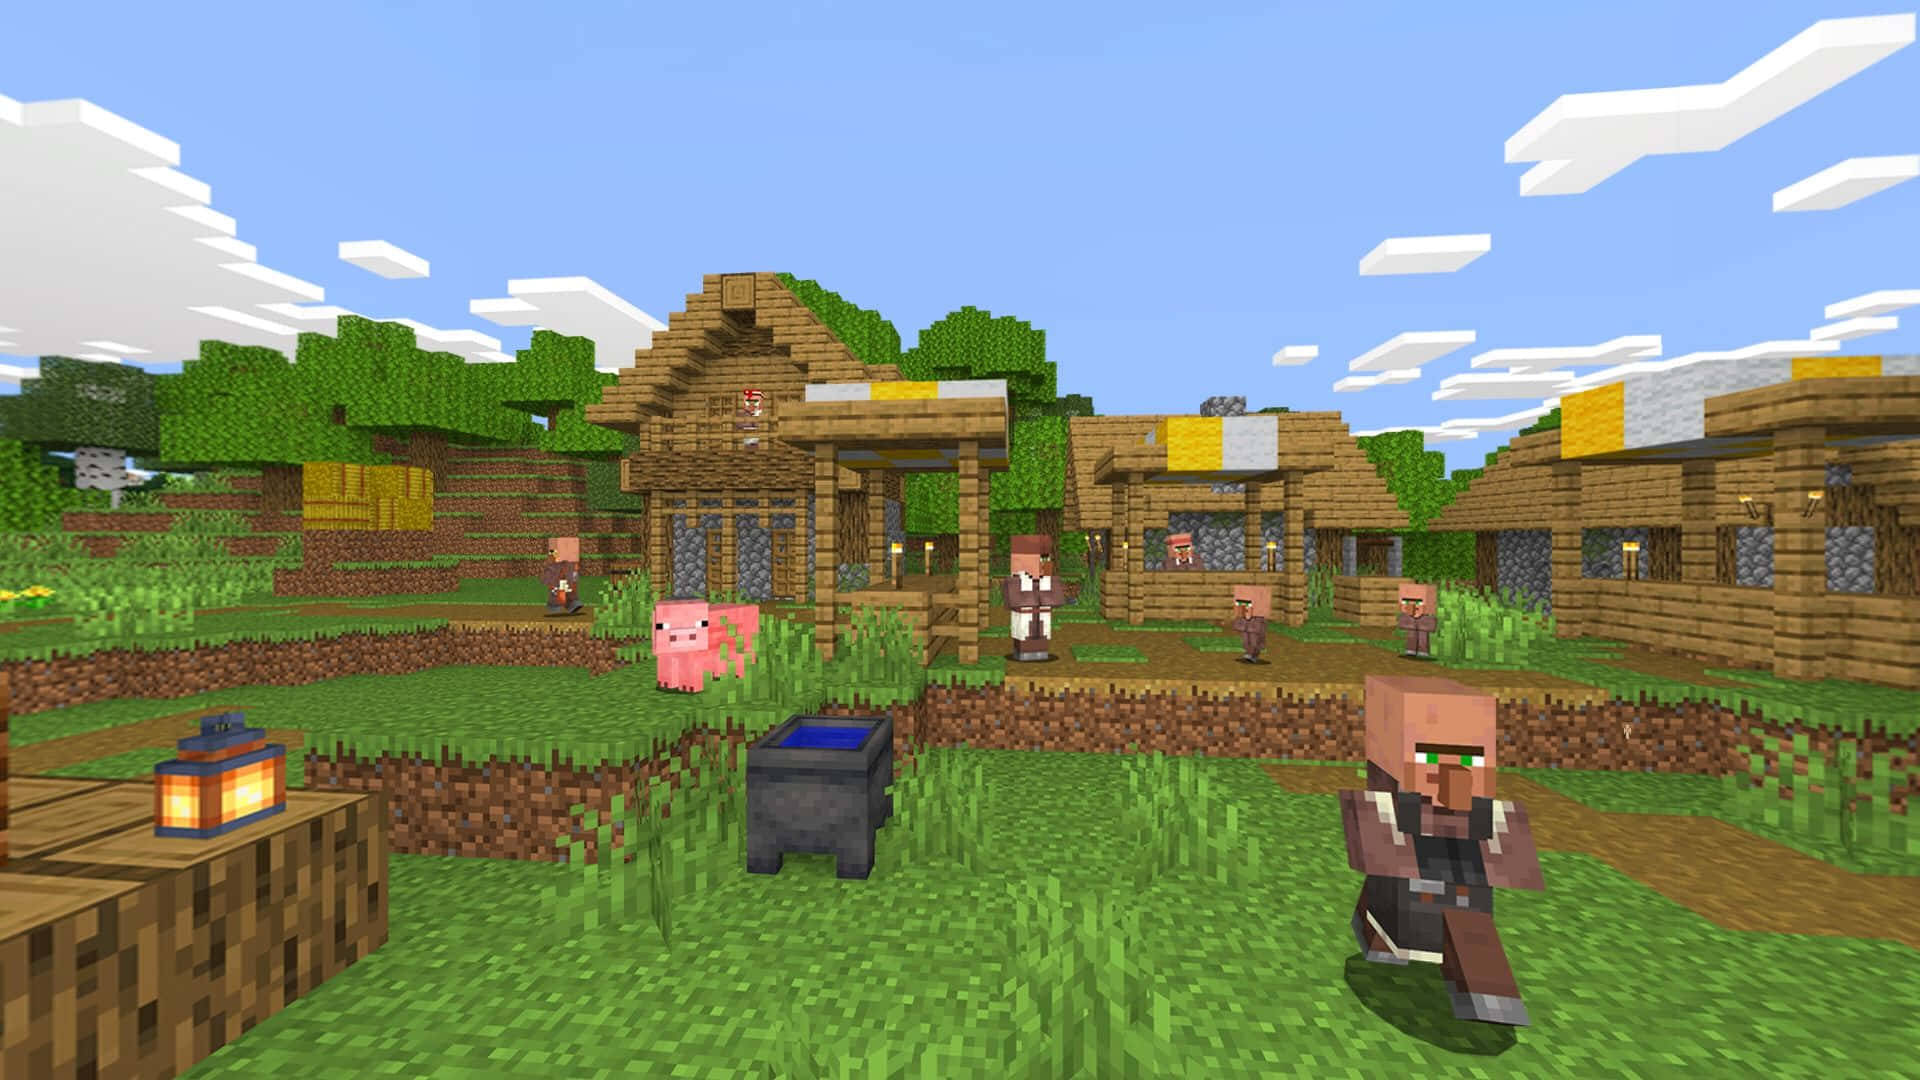 Explore your pixelated world in Minecraft Pocket Edition Wallpaper